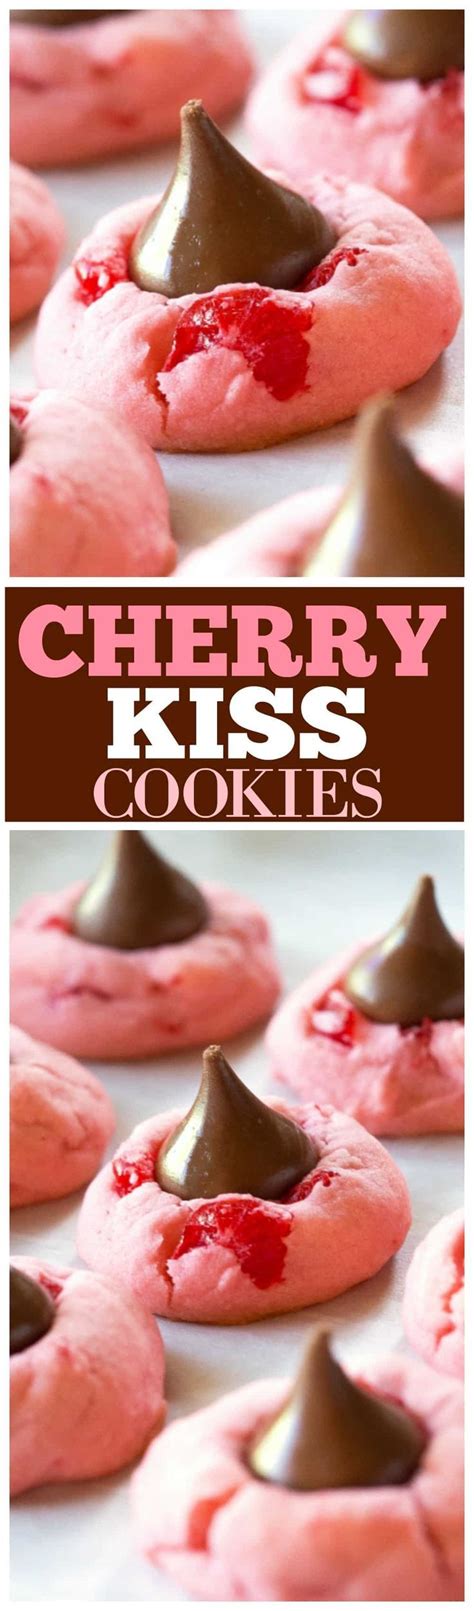 Hershey's kisses always deliver on all three counts; Cherry Kiss Cookies | Recipe | Kiss cookies, Food recipes ...